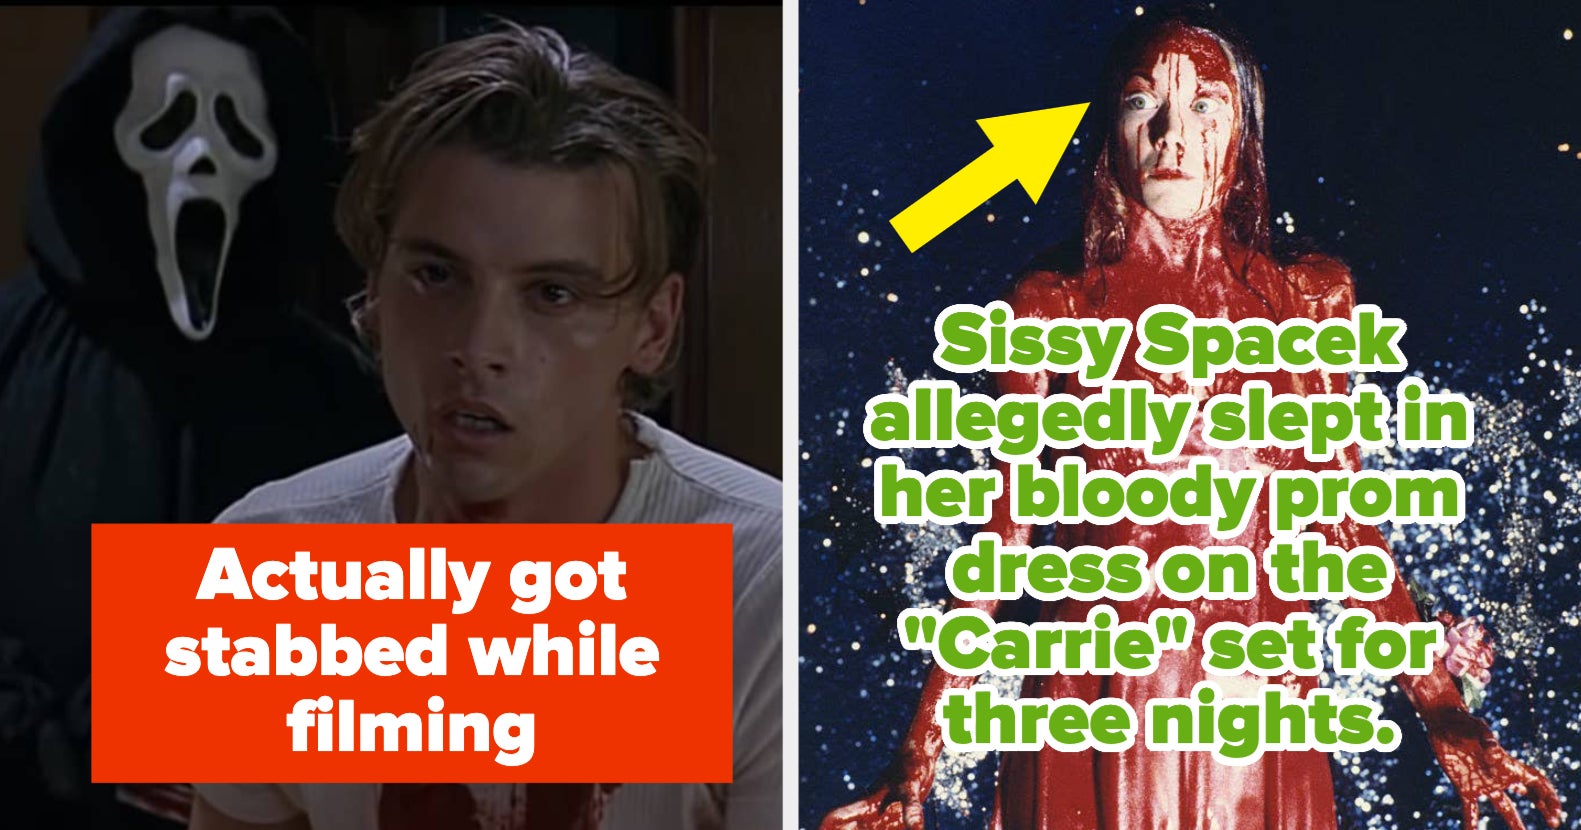 11 Utterly Terrifying Facts And Behind The Scenes Stories From Classic Horror Movies - BuzzFeed